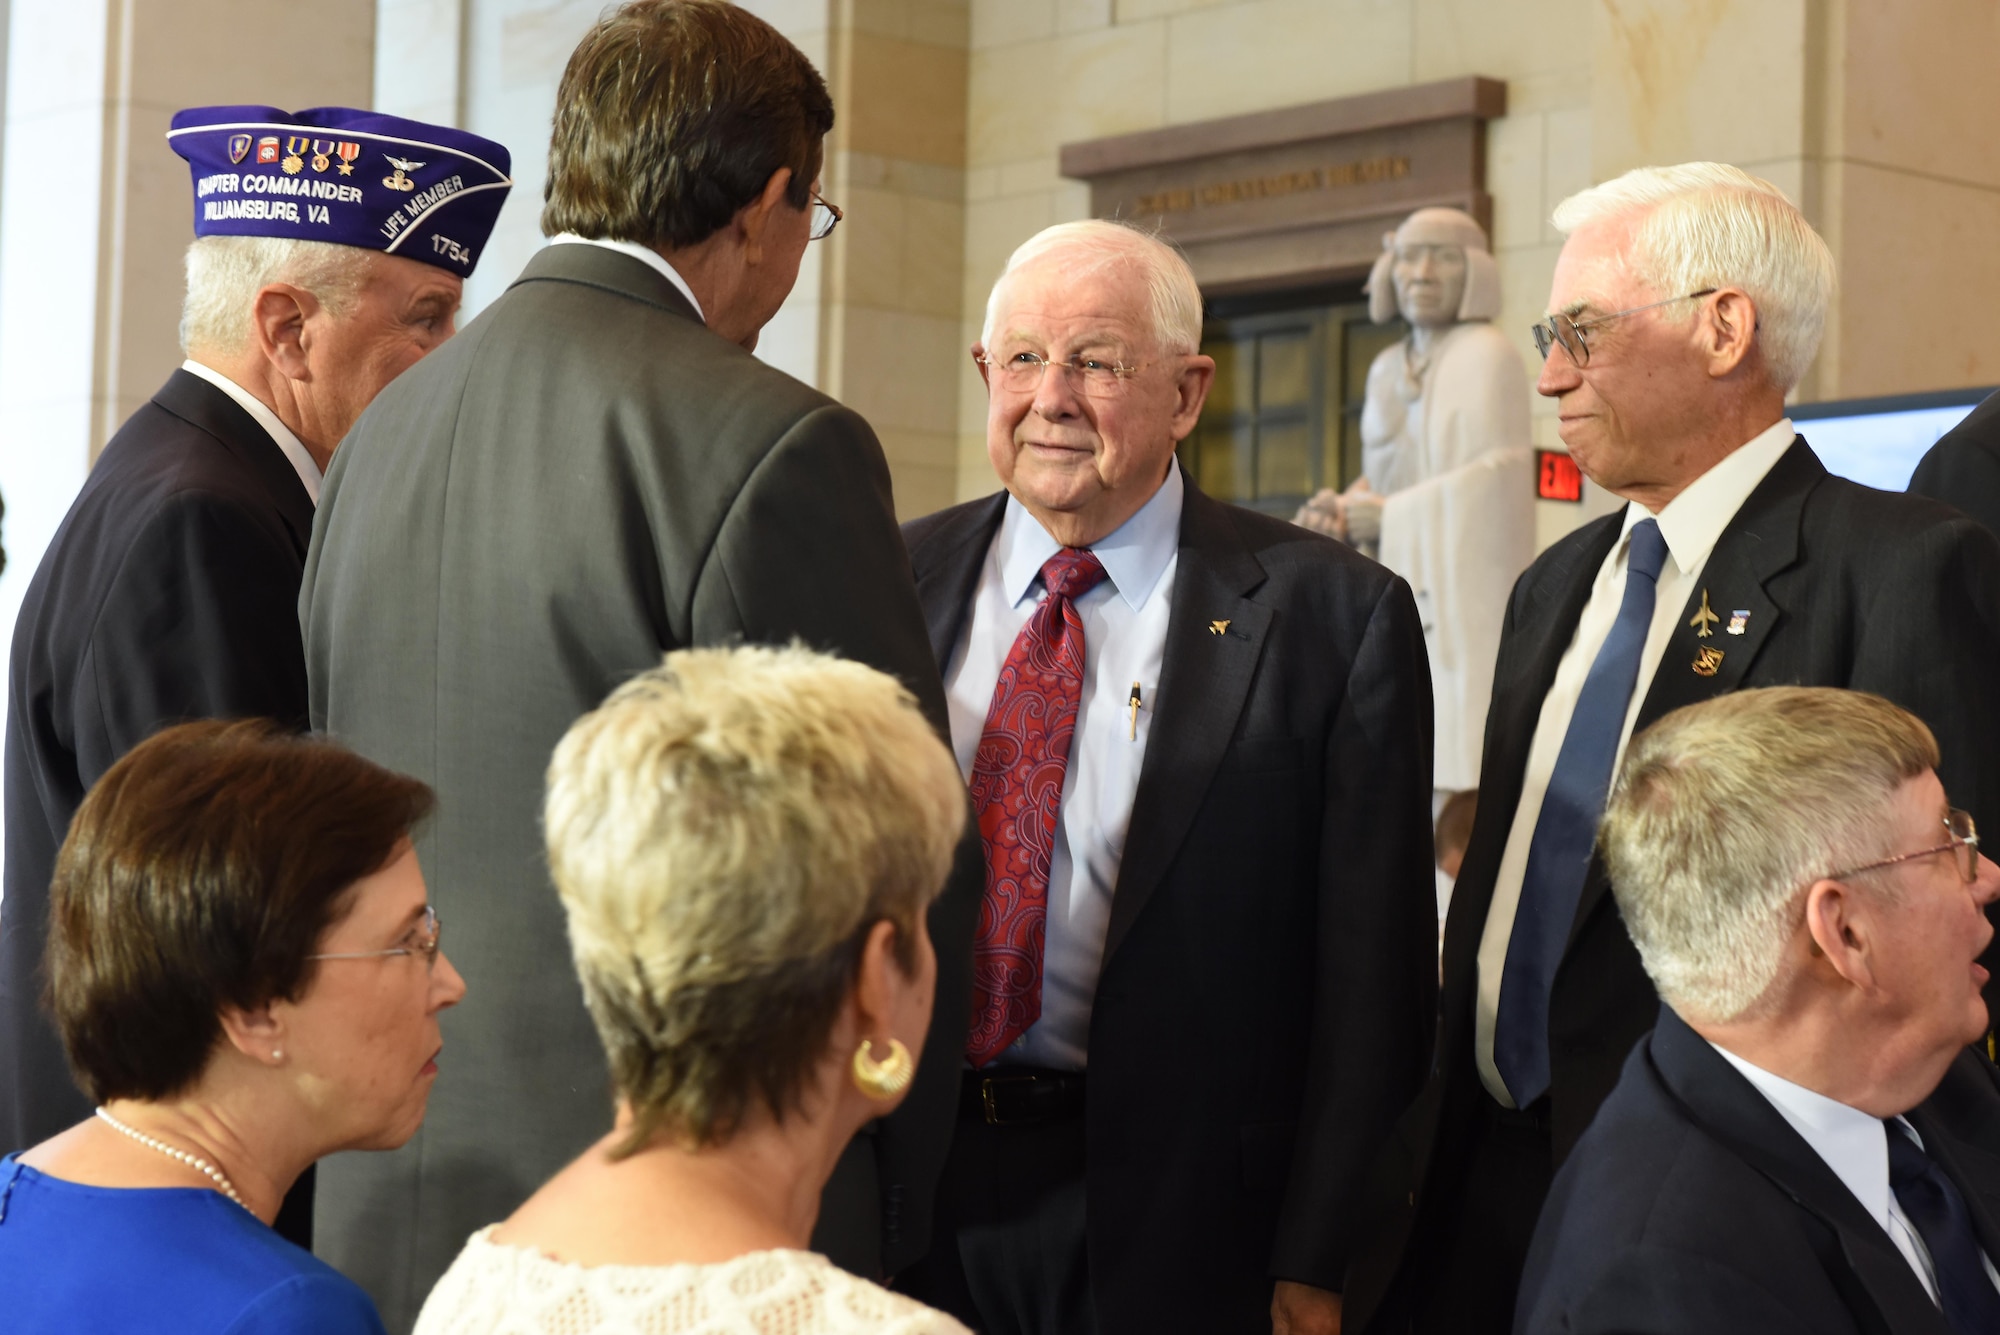 Retired Cols. William Driggers Jr. and Michael Brazelton (right) speak with other Vietnam War veterans during the Congressional Commemoration for the 50th Anniversary of the Vietnam War in the Emancipation Hall of the U.S. Capitol in Washington, July 8, 2015. (U.S. Air Force photo/Staff Sgt. Carlin Leslie)